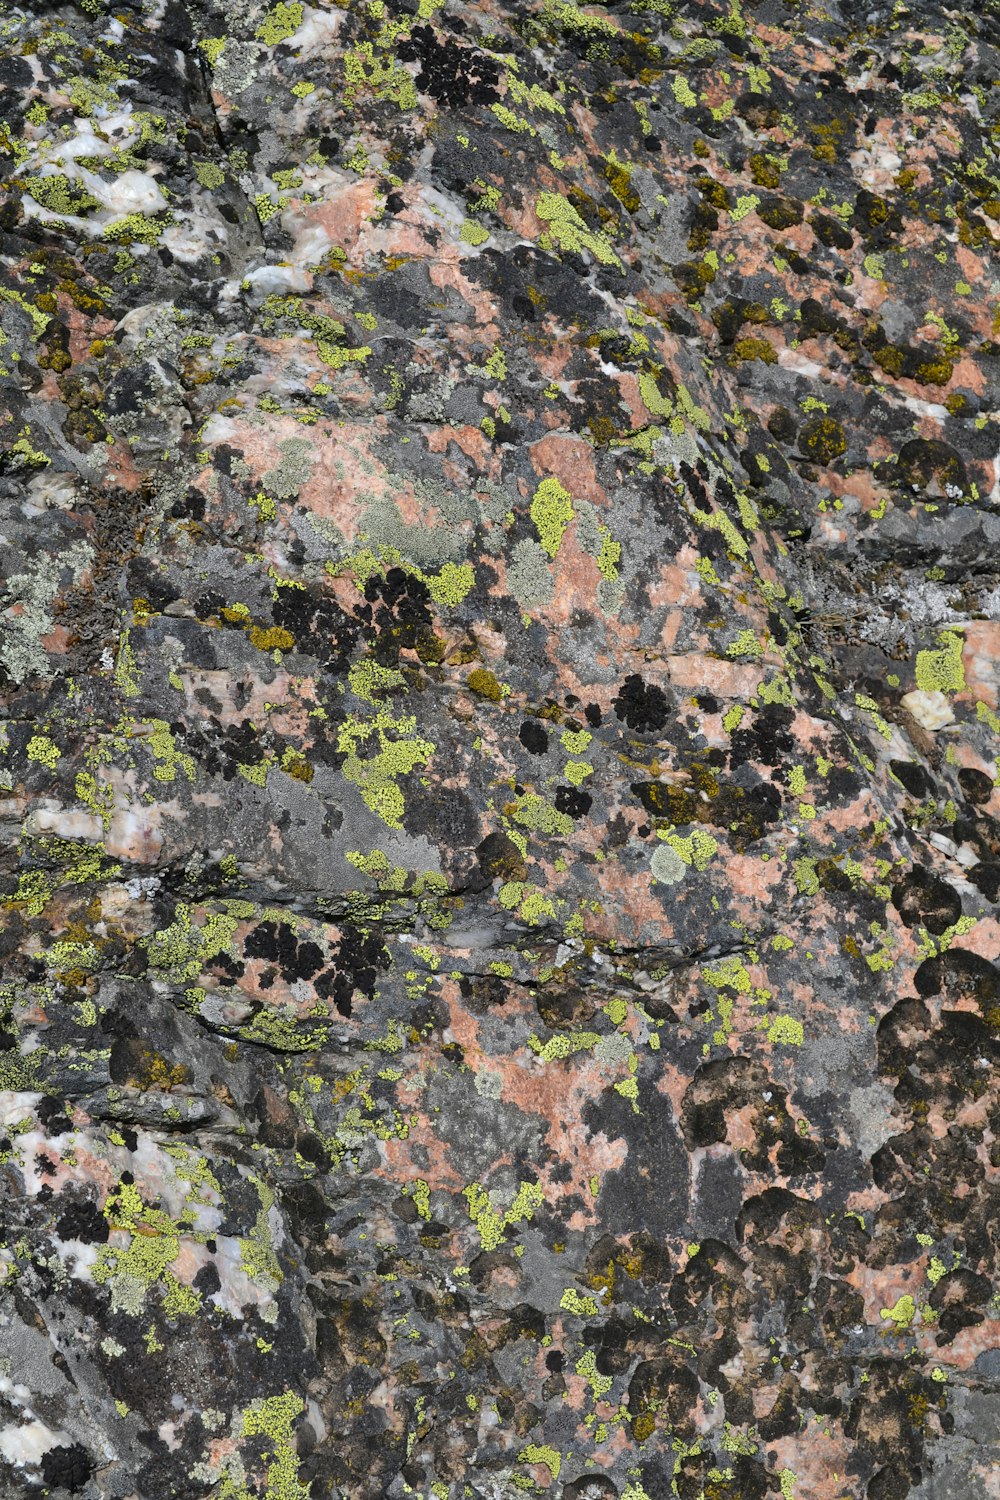 a close up of a rock with moss growing on it